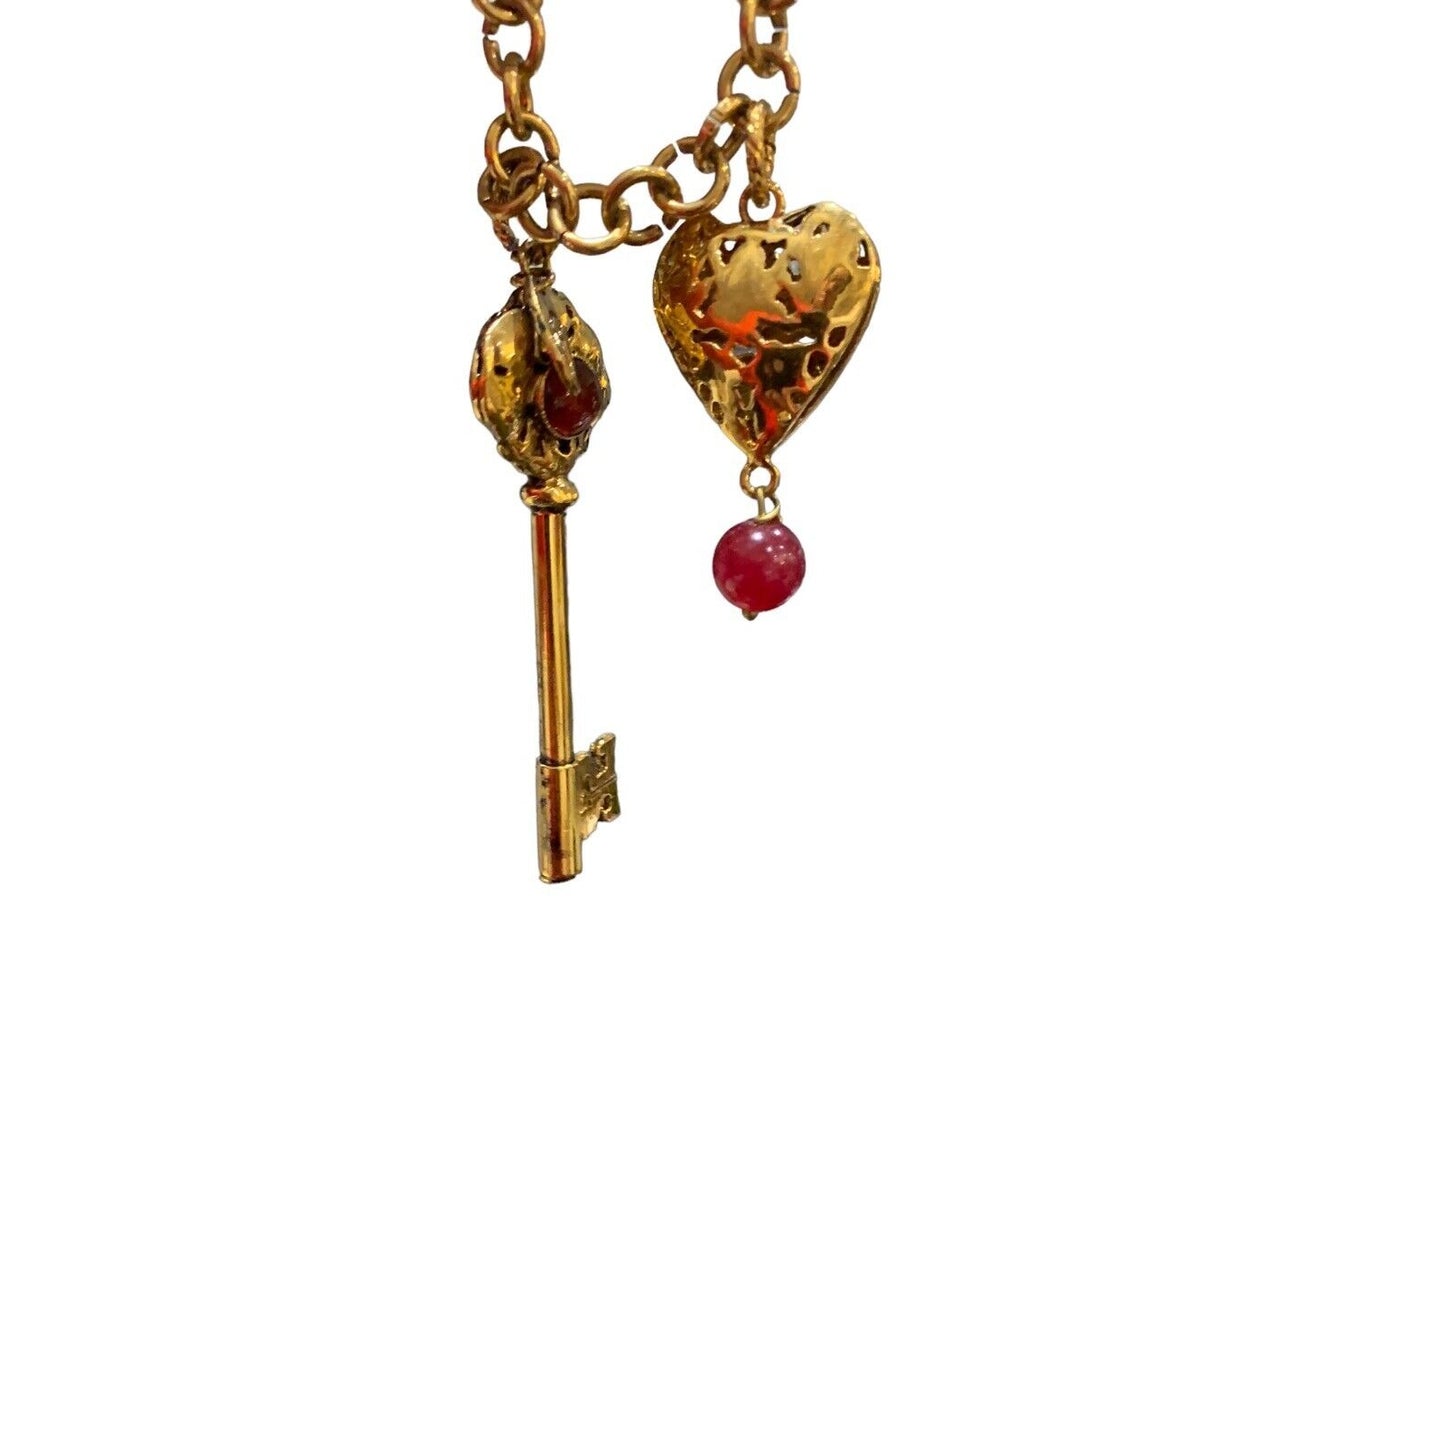 Canipelli Firenze Handbag Charm Key To My Heart with Cranberry Red Colored Stones